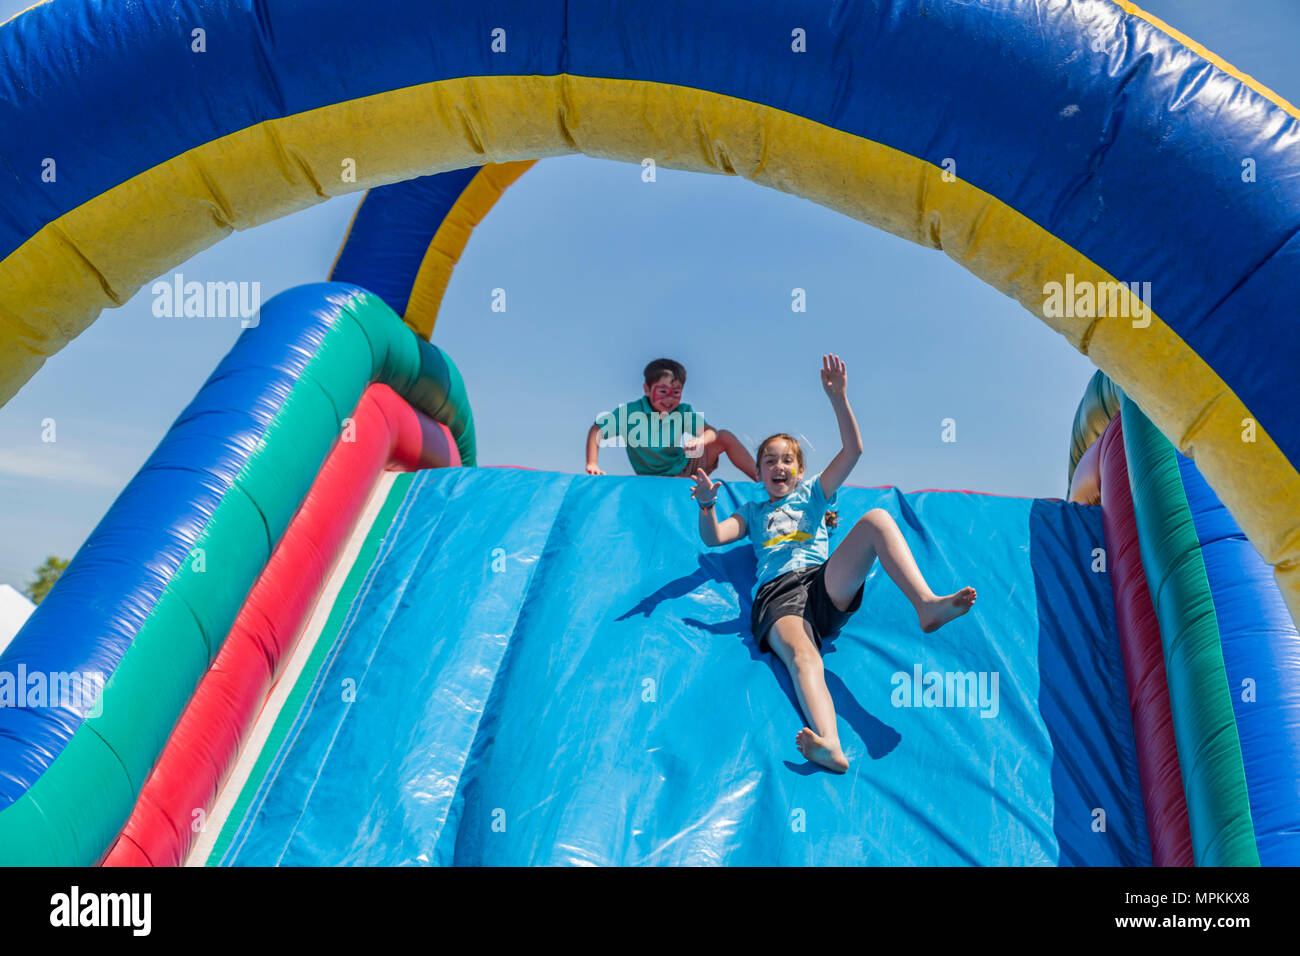 Children play on inflatable slide during a Family Fun Day at Crosspoint Church in Gulfport, Mississippi Stock Photo